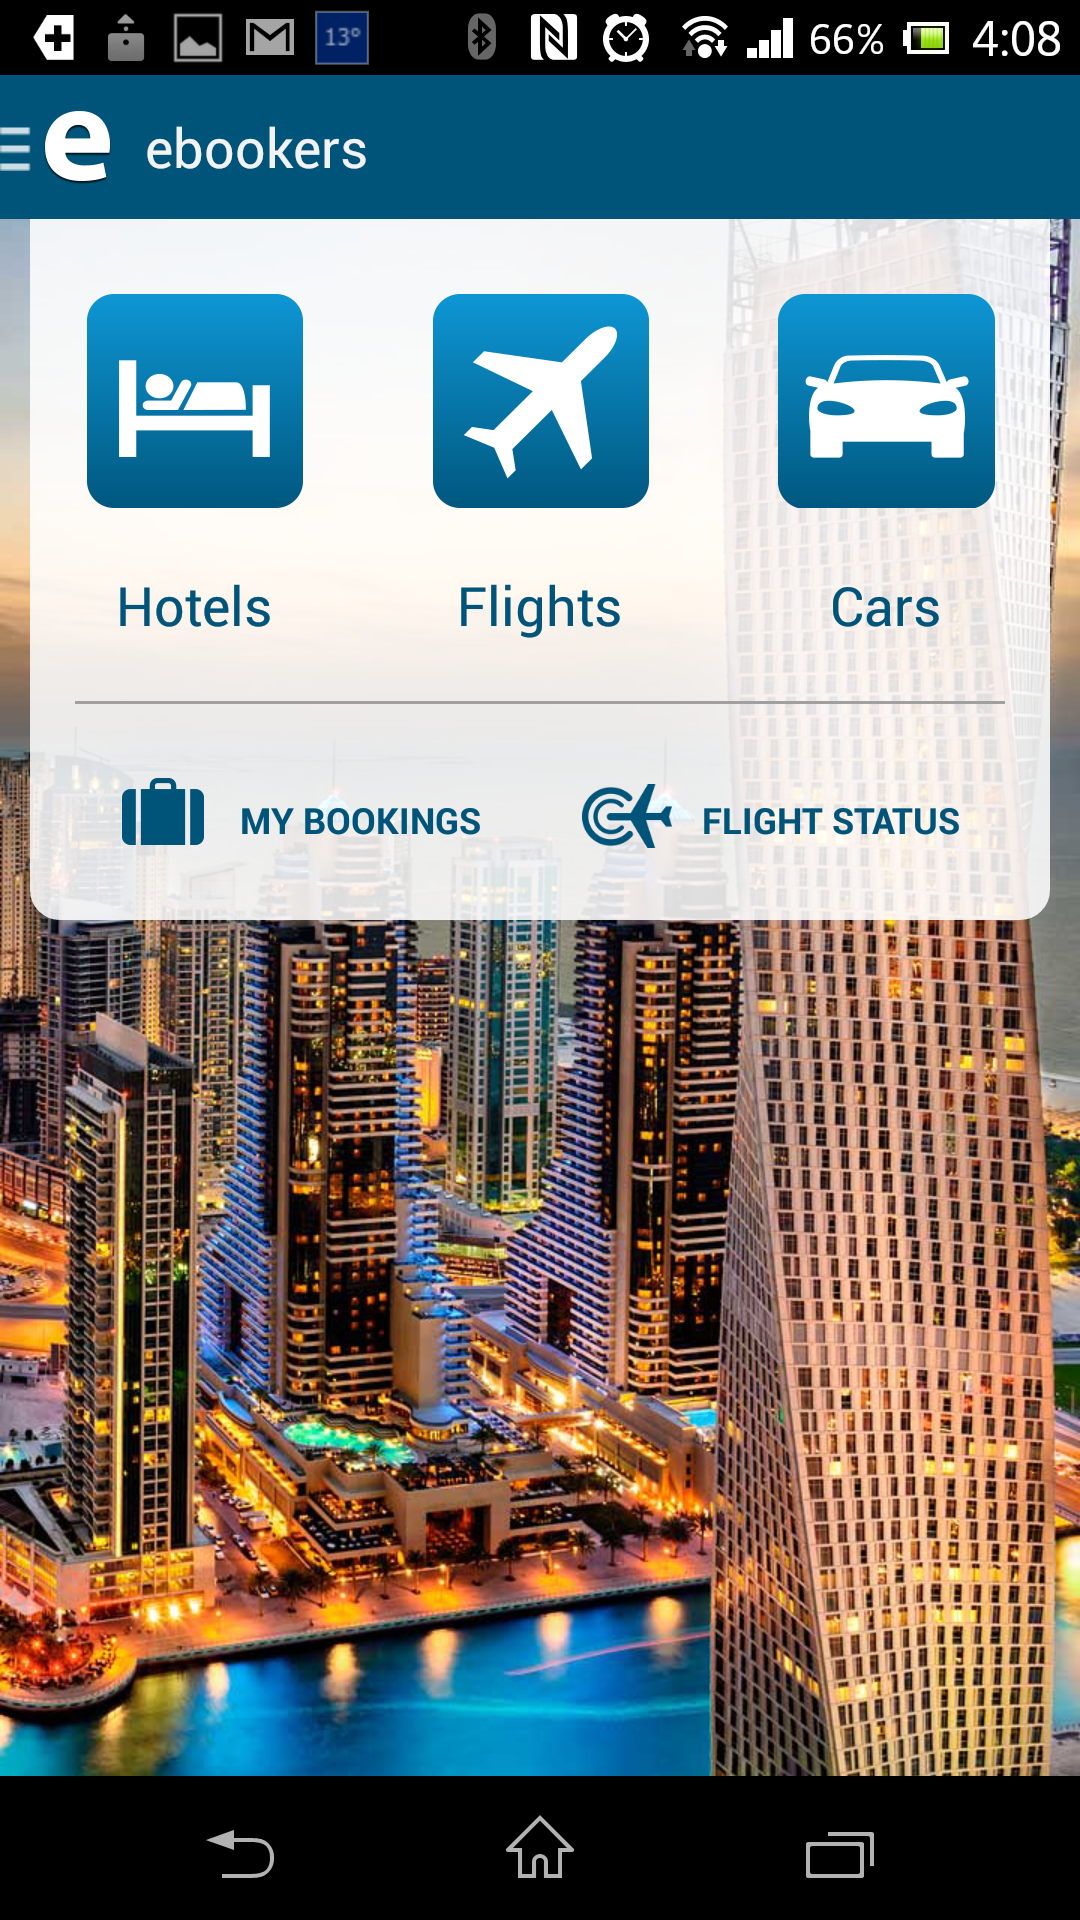 ebookers Launches All-in-one Travel App